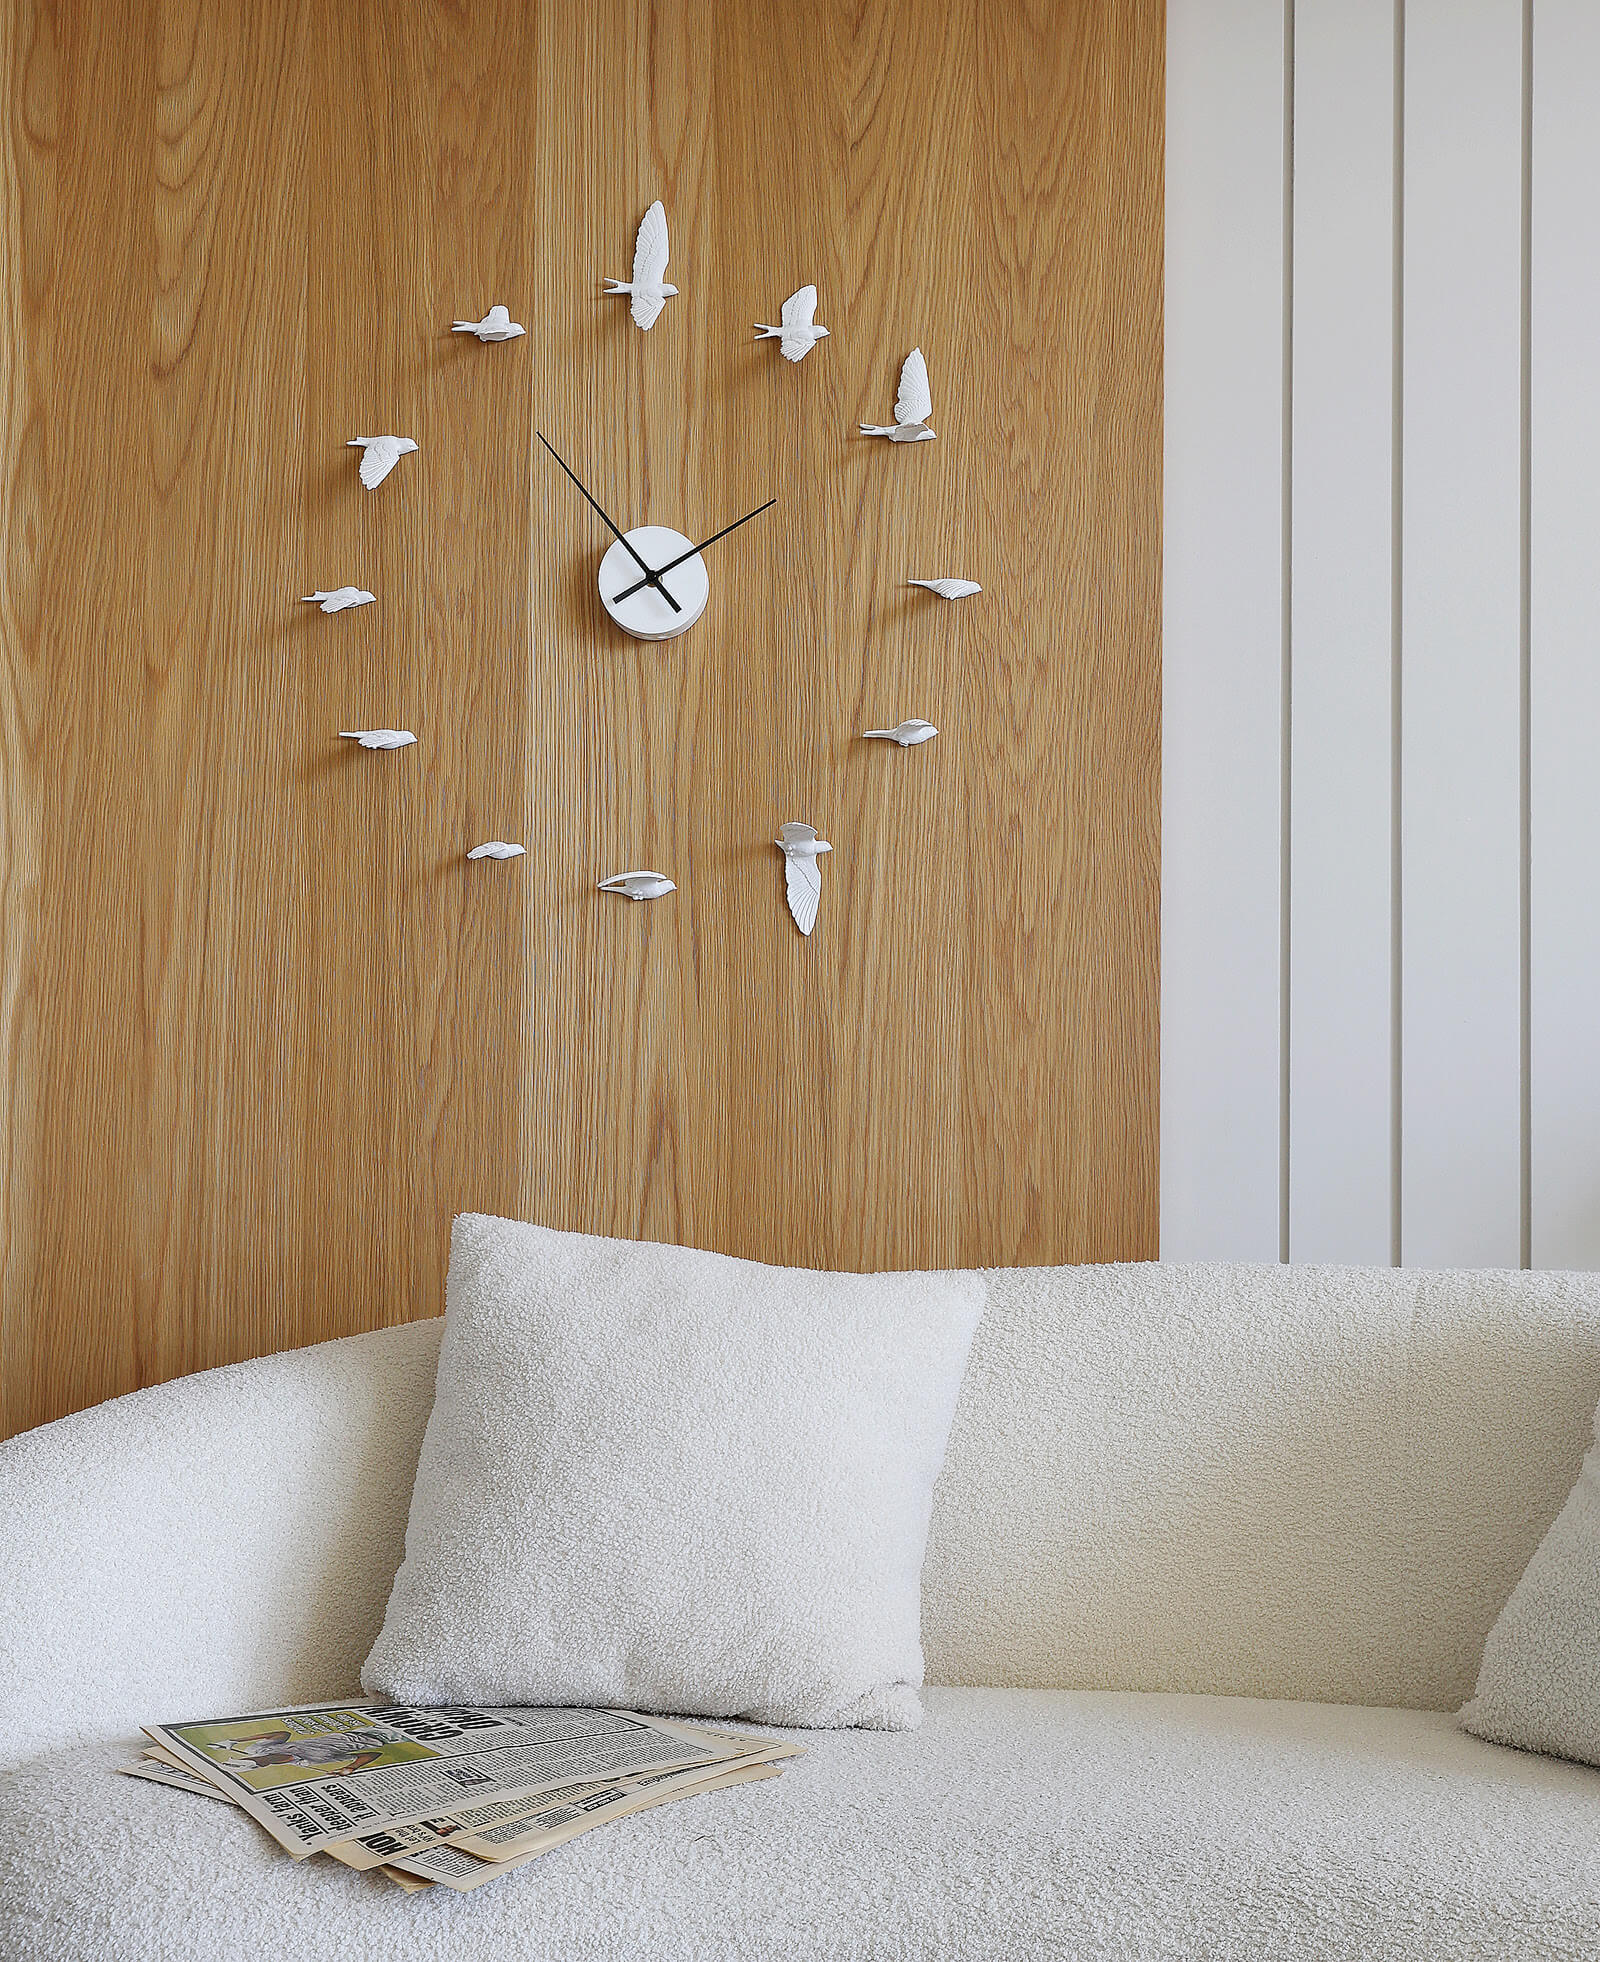 Wall clock is the unique gift for bird lovers & nature enthusiast